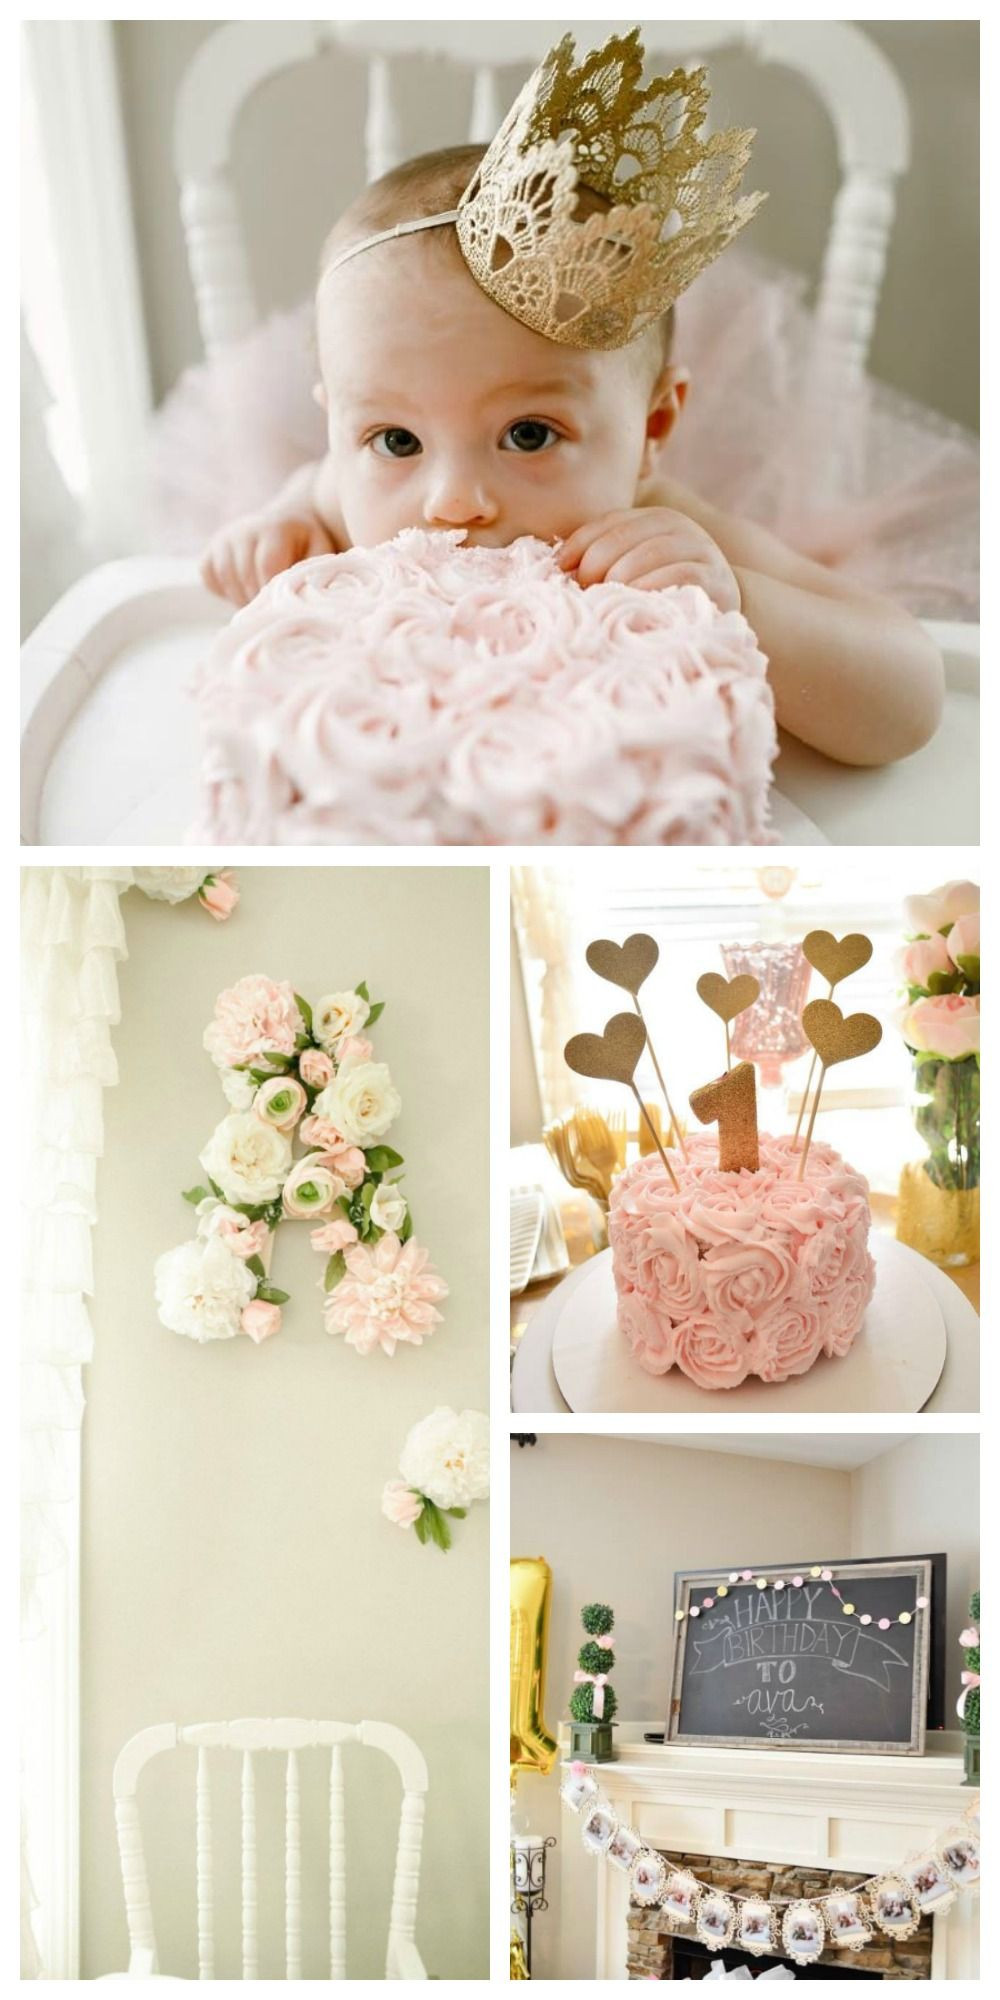 Baby Girl First Birthday Decoration Ideas
 Ava s Floral First Birthday